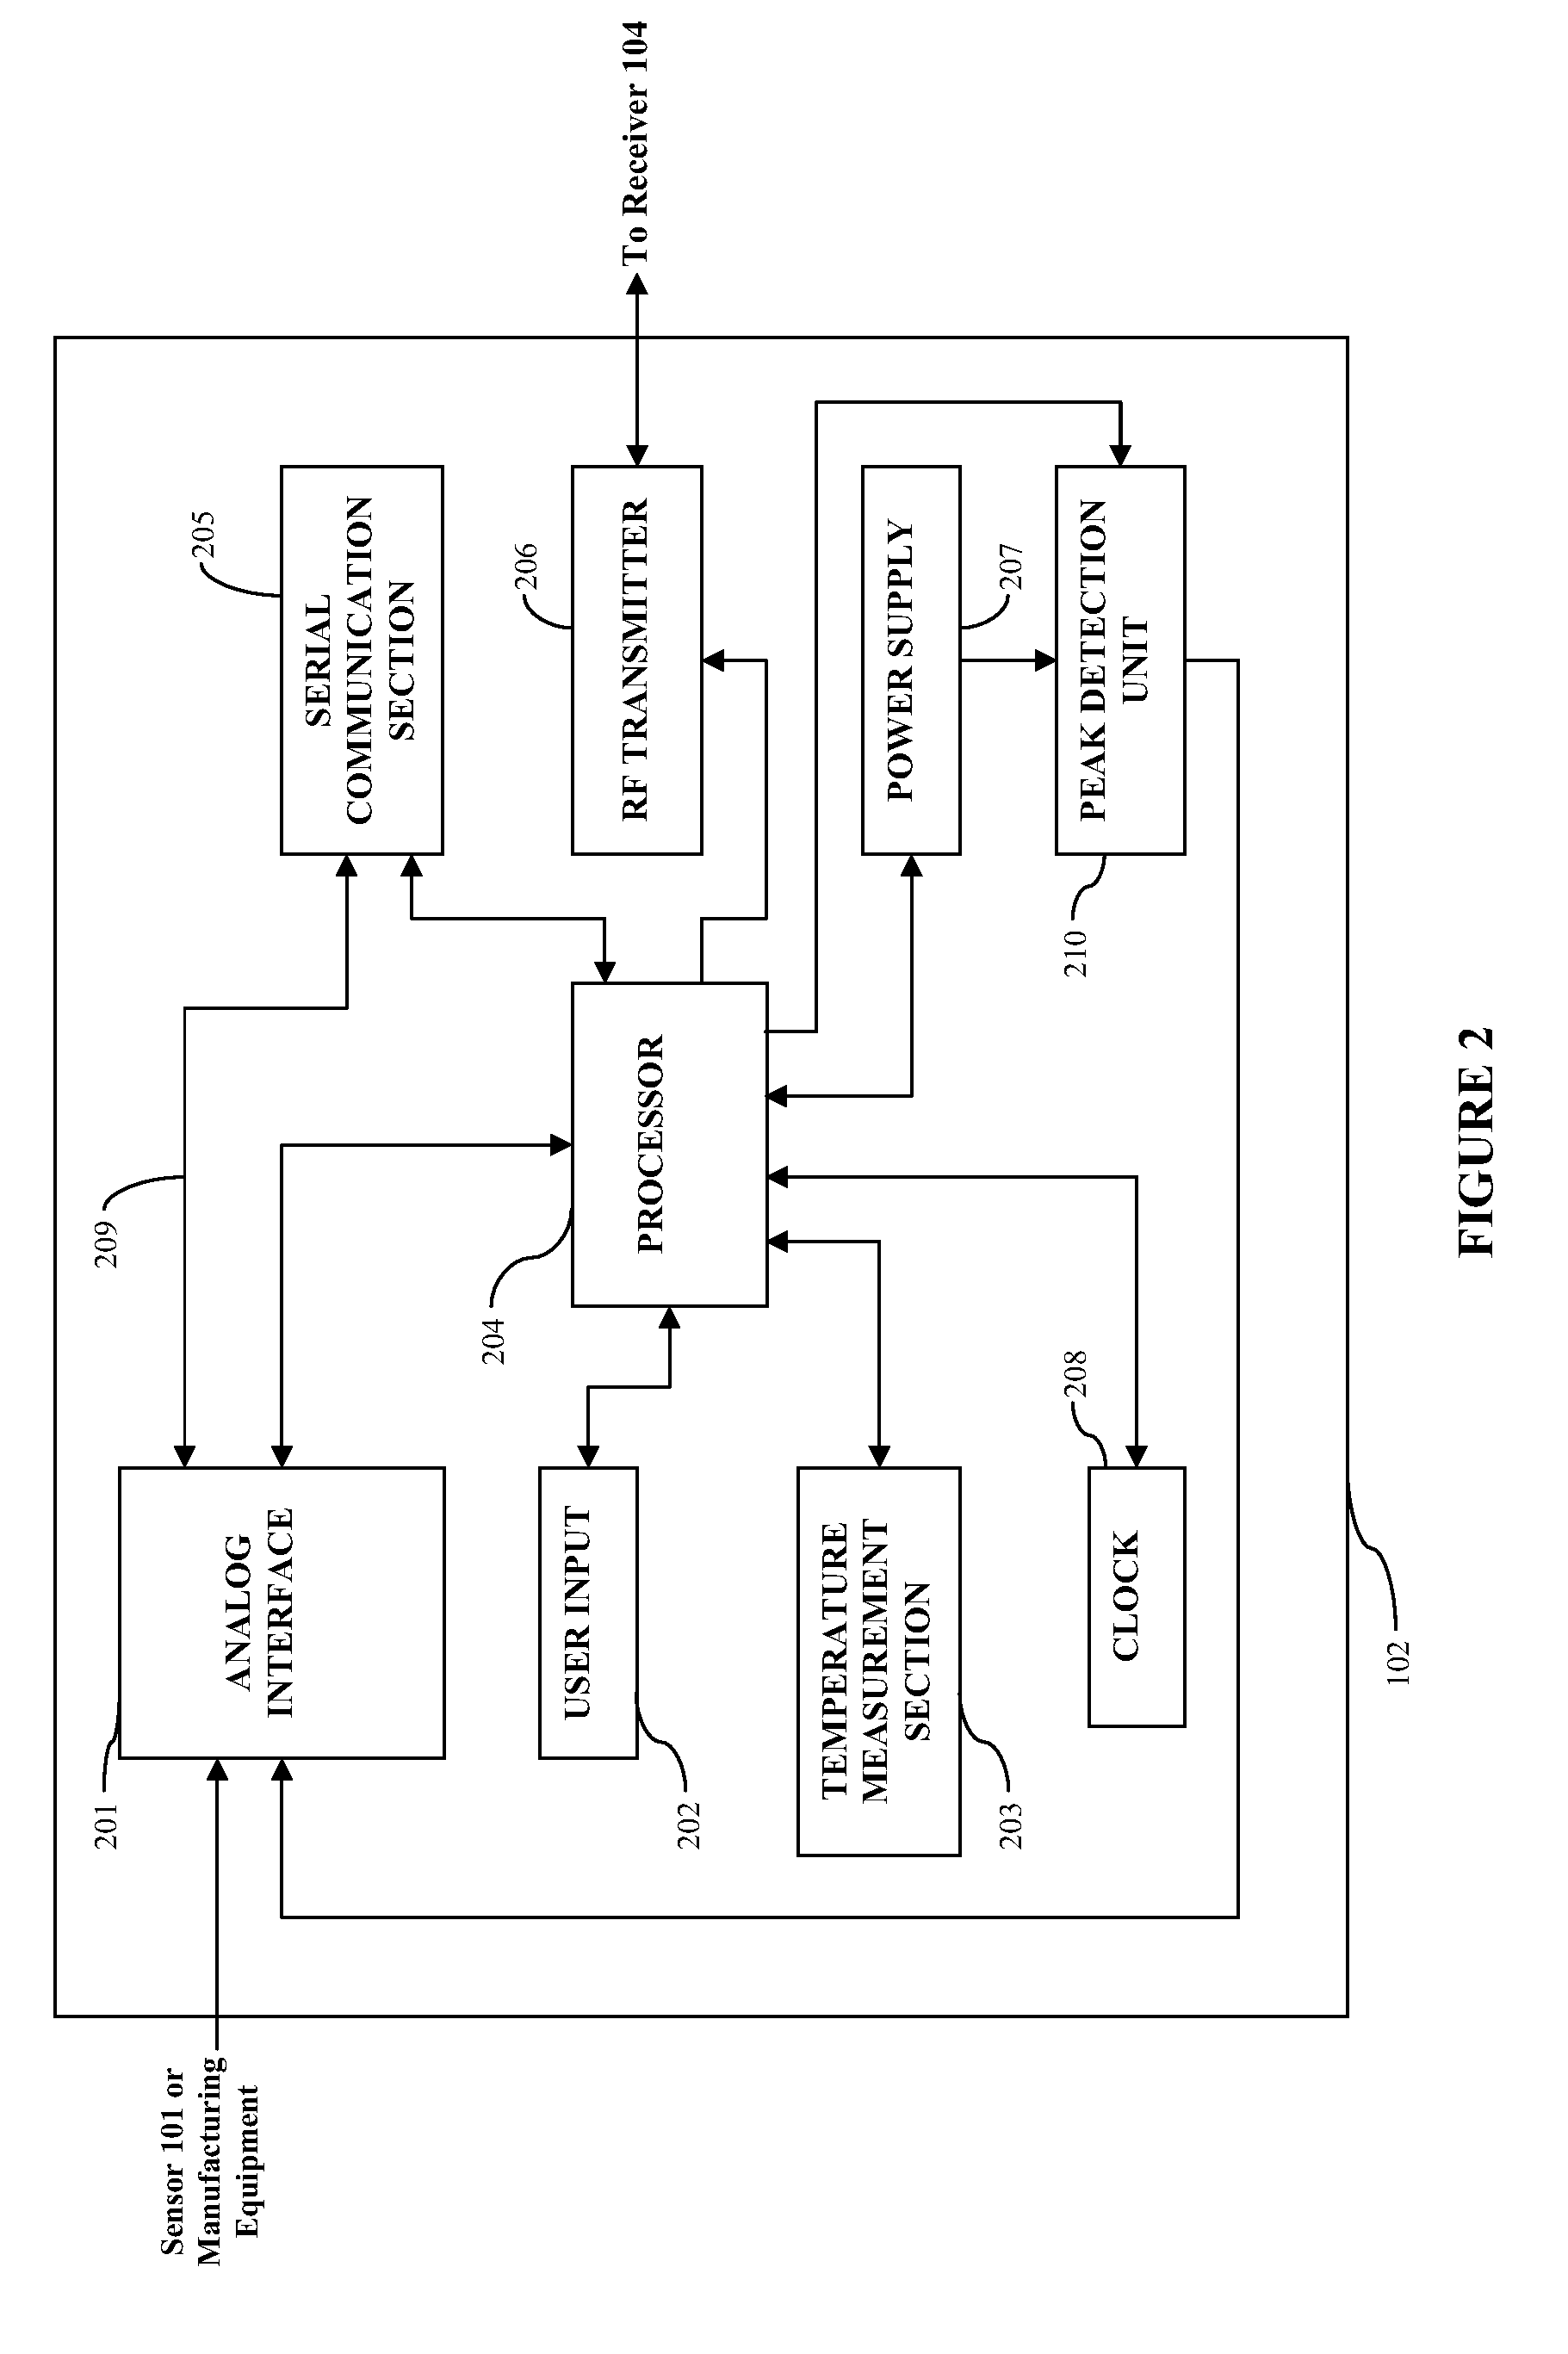 Method and apparatus for providing peak detection circuitry for data communication systems